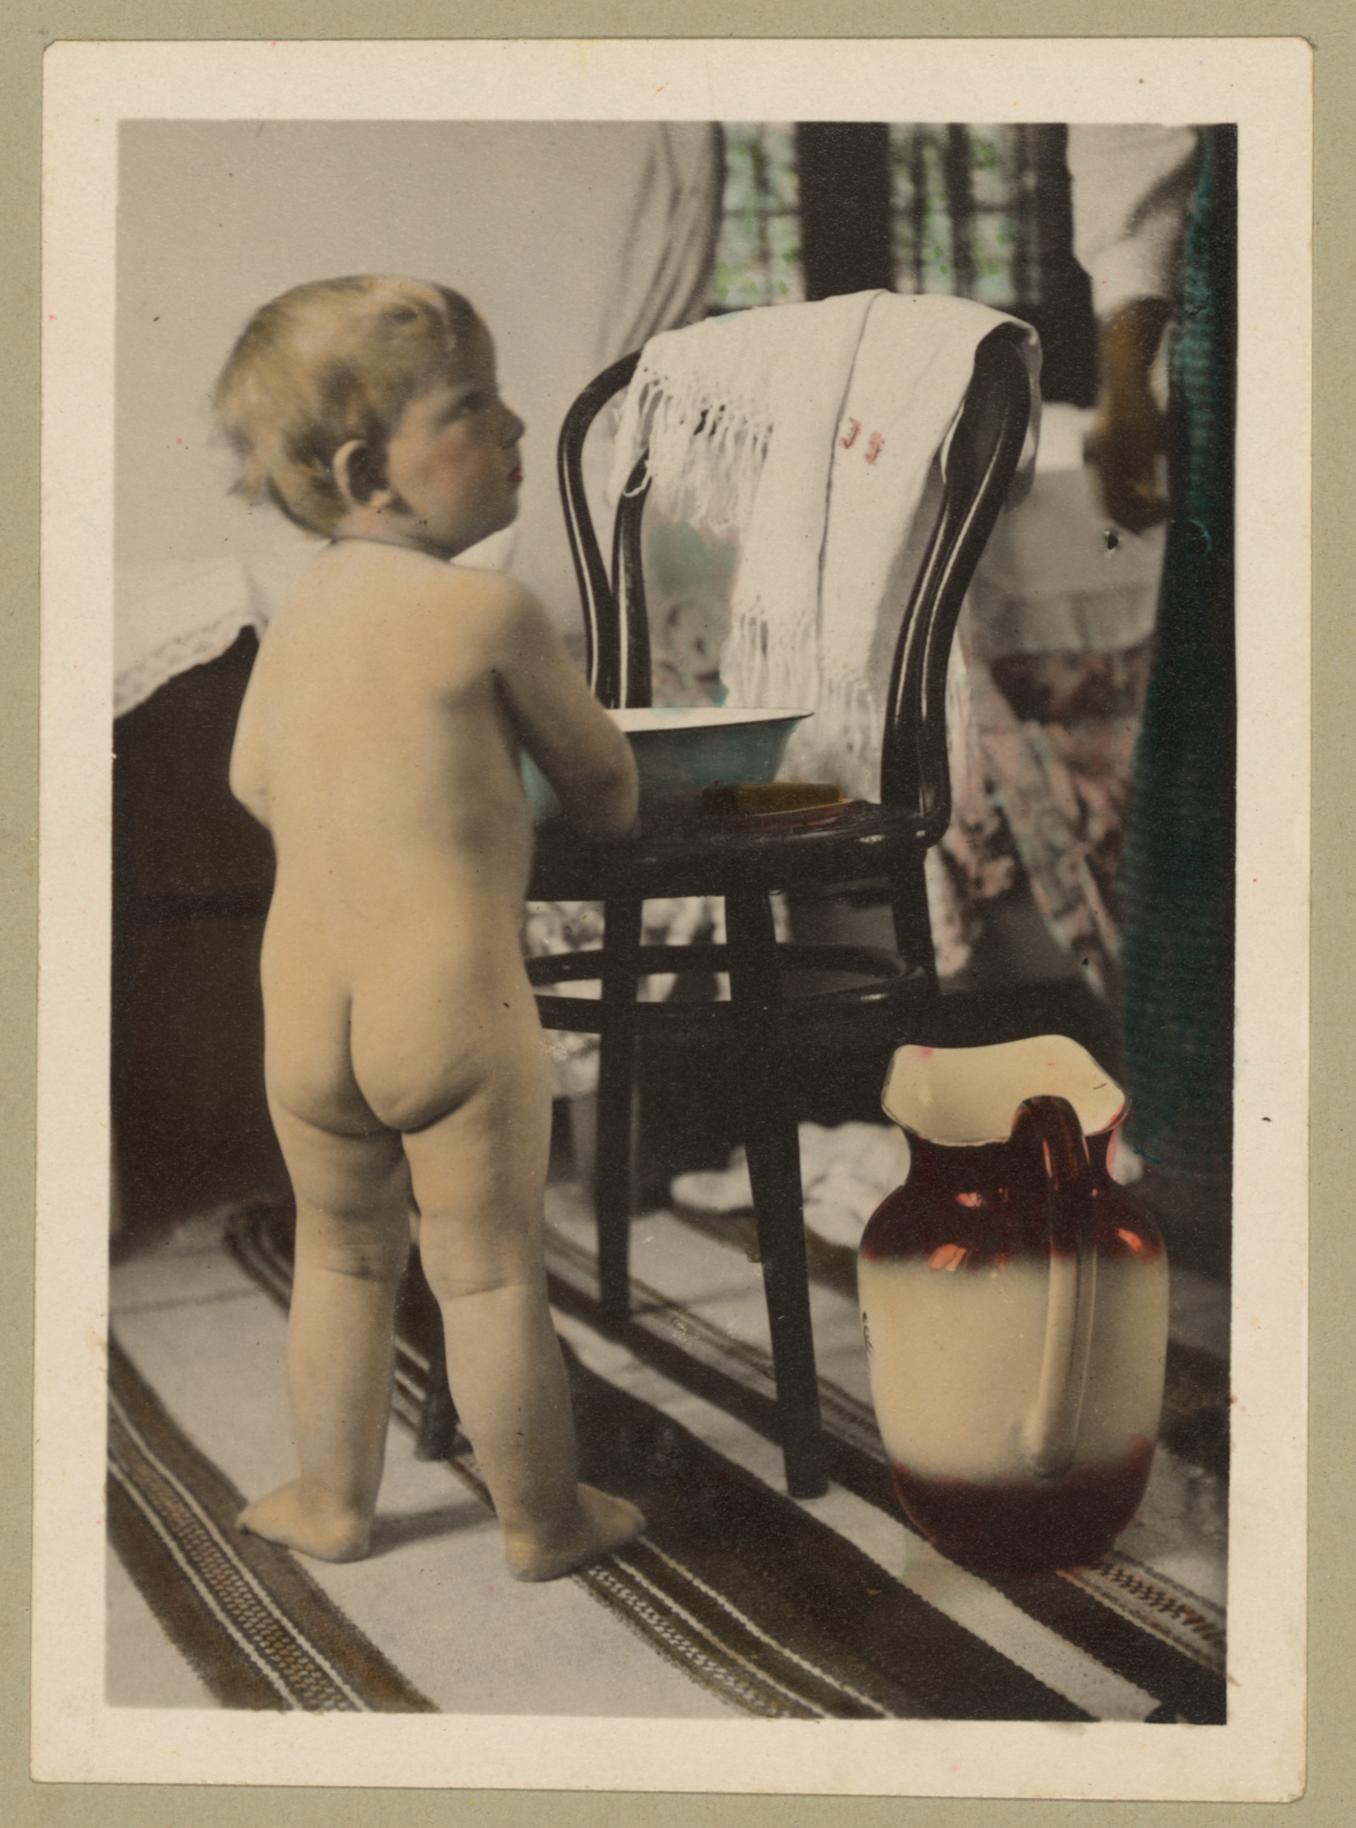 Vintage_Picture_of_a_Cute_Baby_Boy_About_to_Wash_Himself_with_a_Basin_and_Pitcher_of_Water